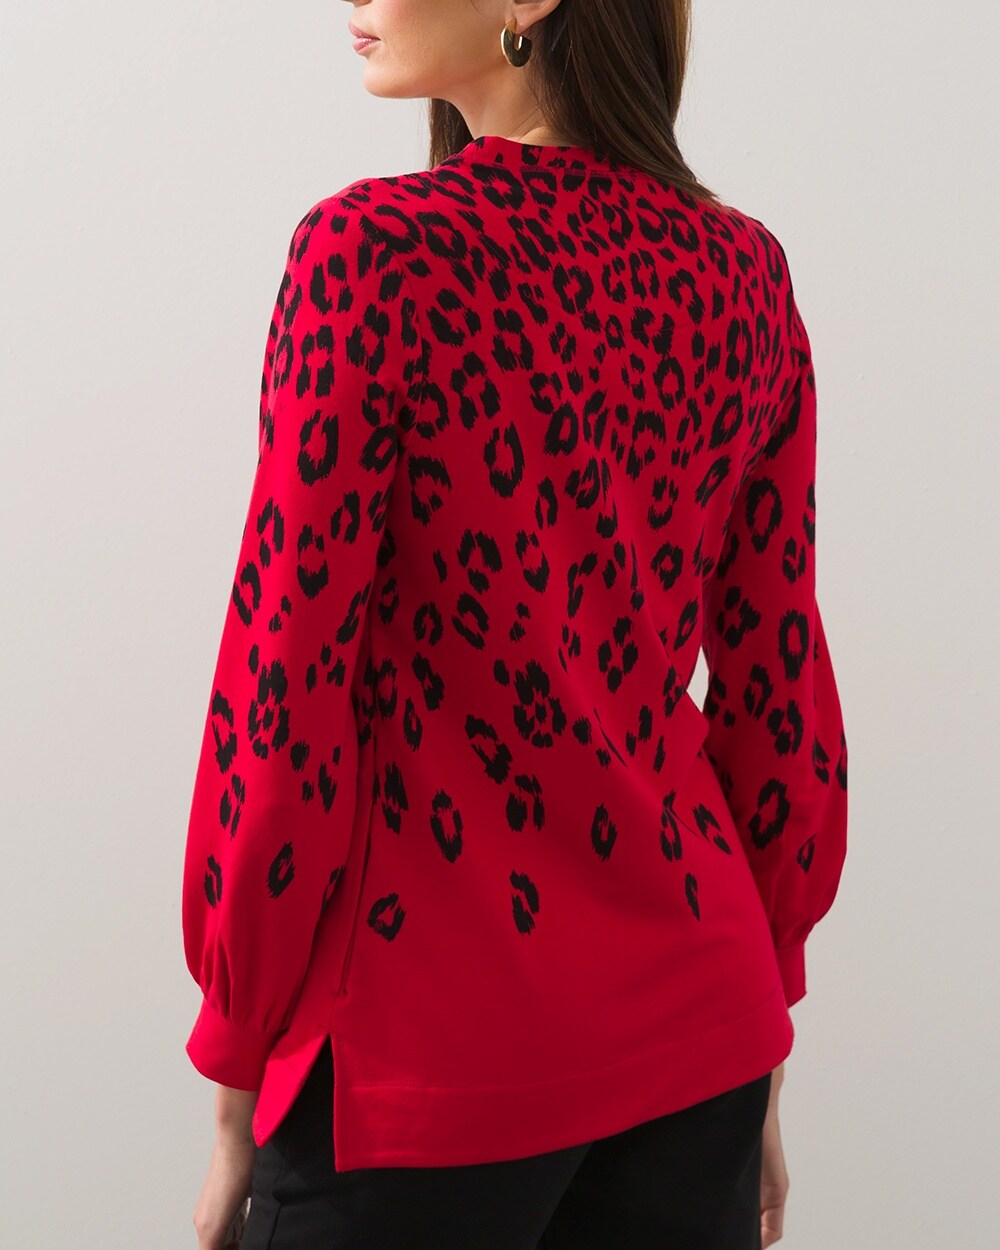 Zenergy French Terry Leopard Tunic - Chico's